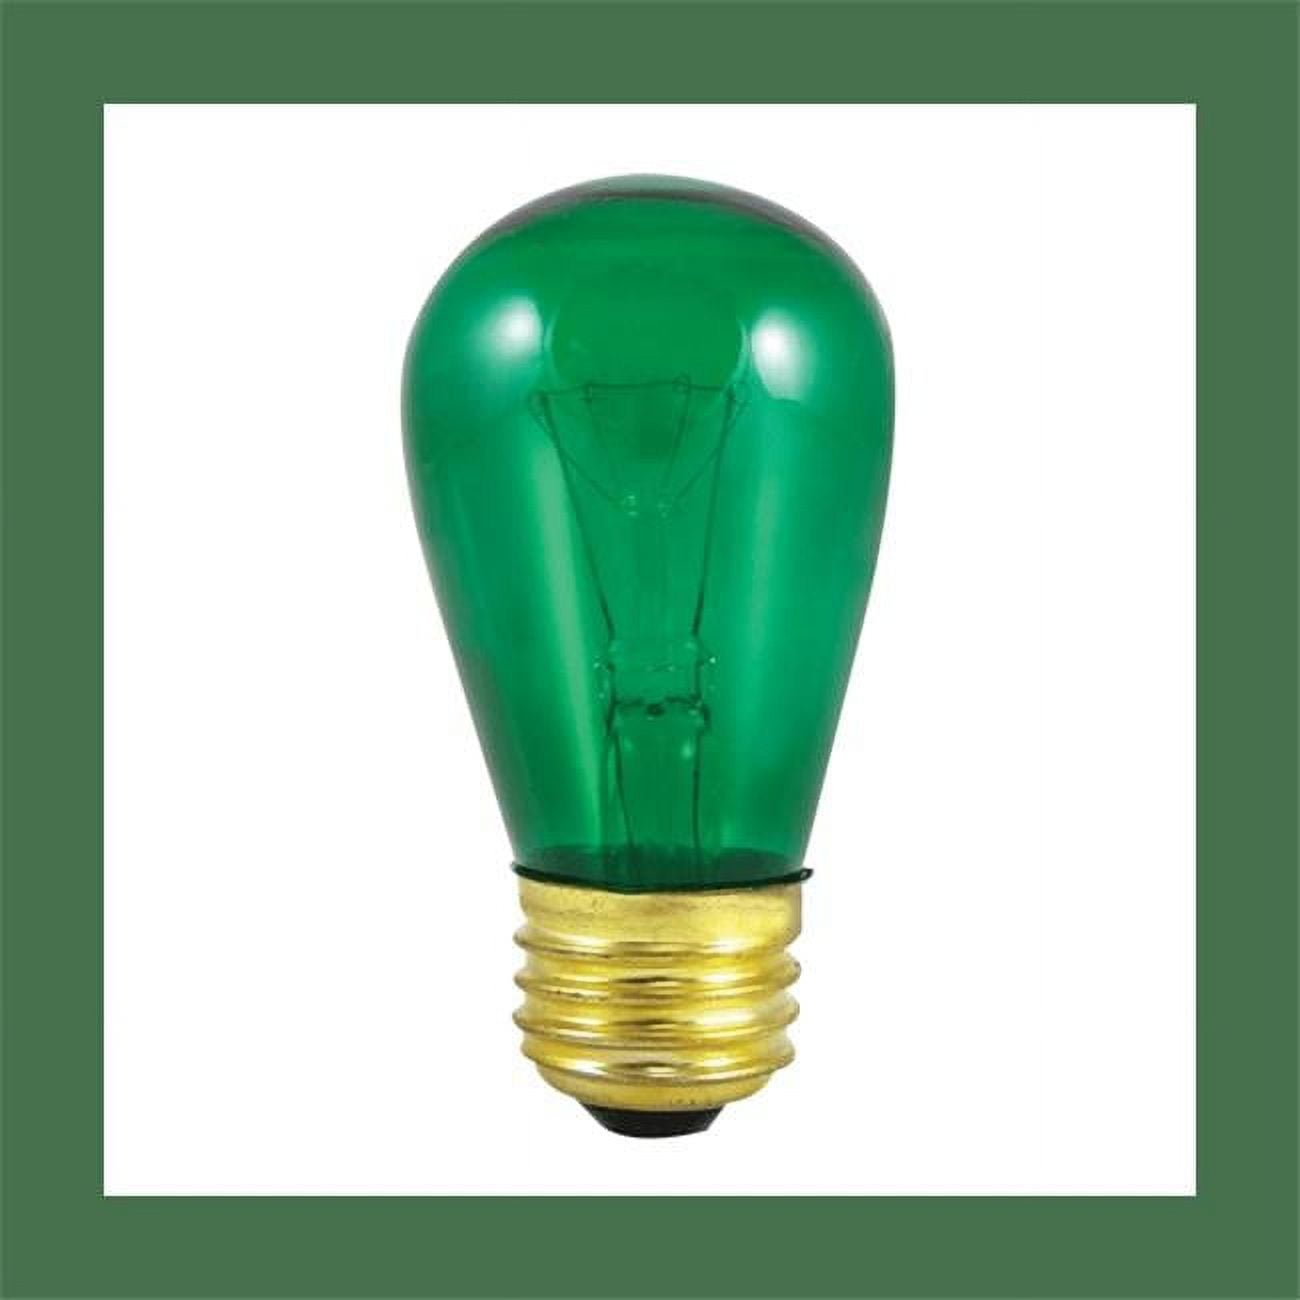 Picture of Bulbrite 861209 11 watt Dimmable S14 Incandescent Light Bulbs with Medium E26 Base, Transparent Green - Pack of 25